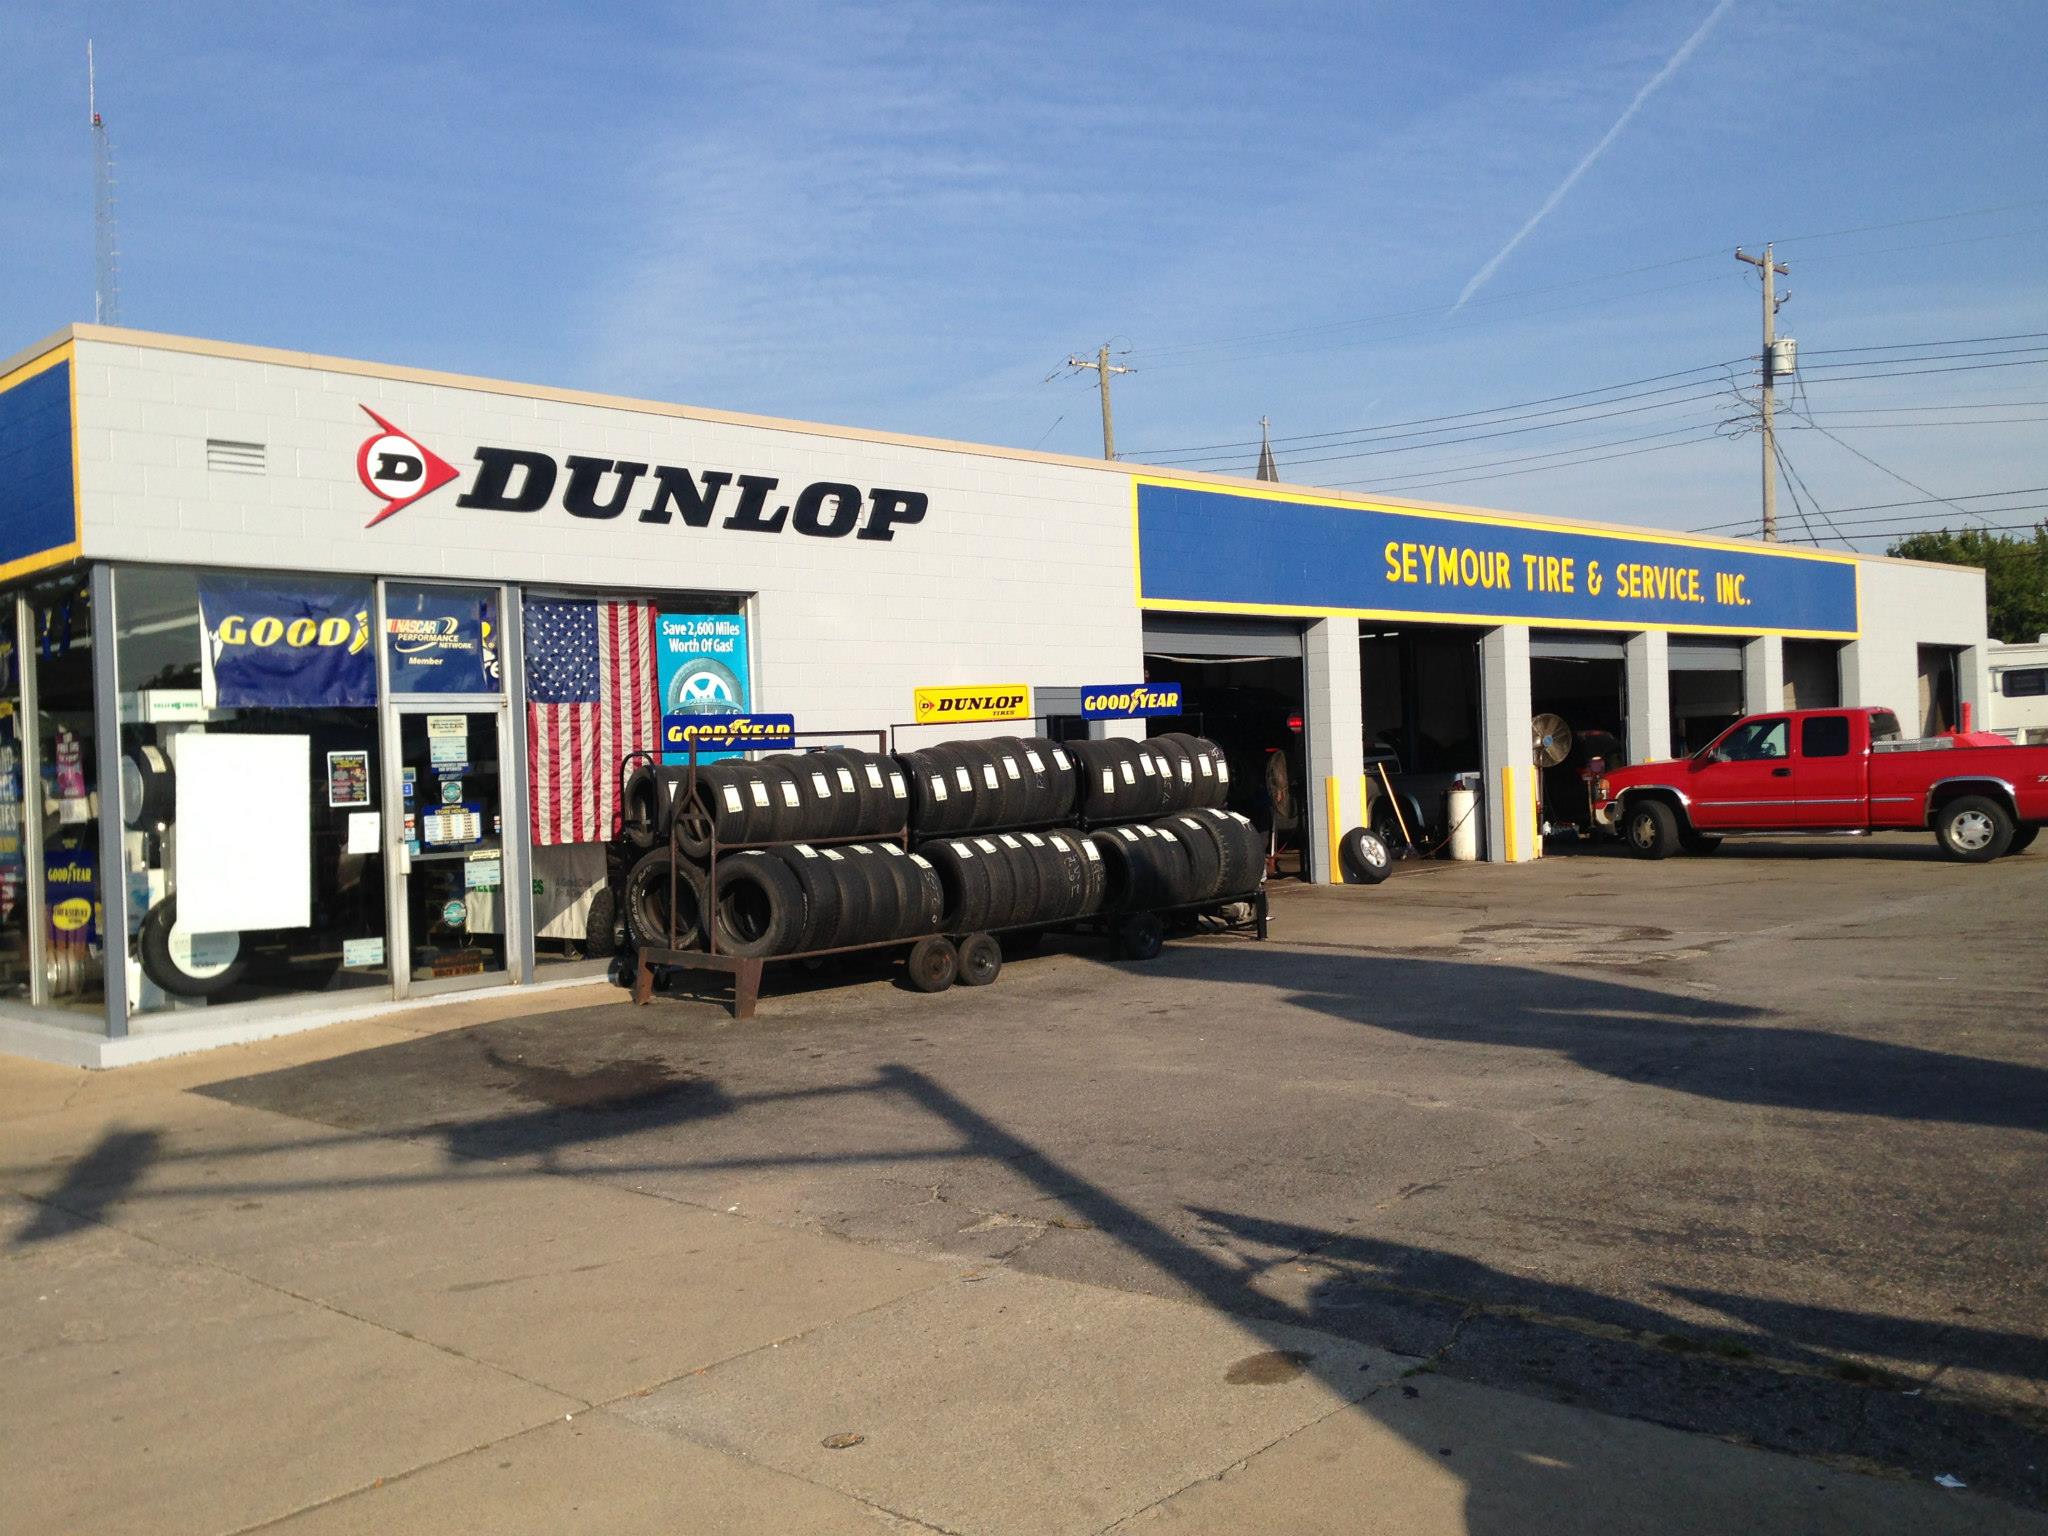 Seymour Tire and Service, Inc